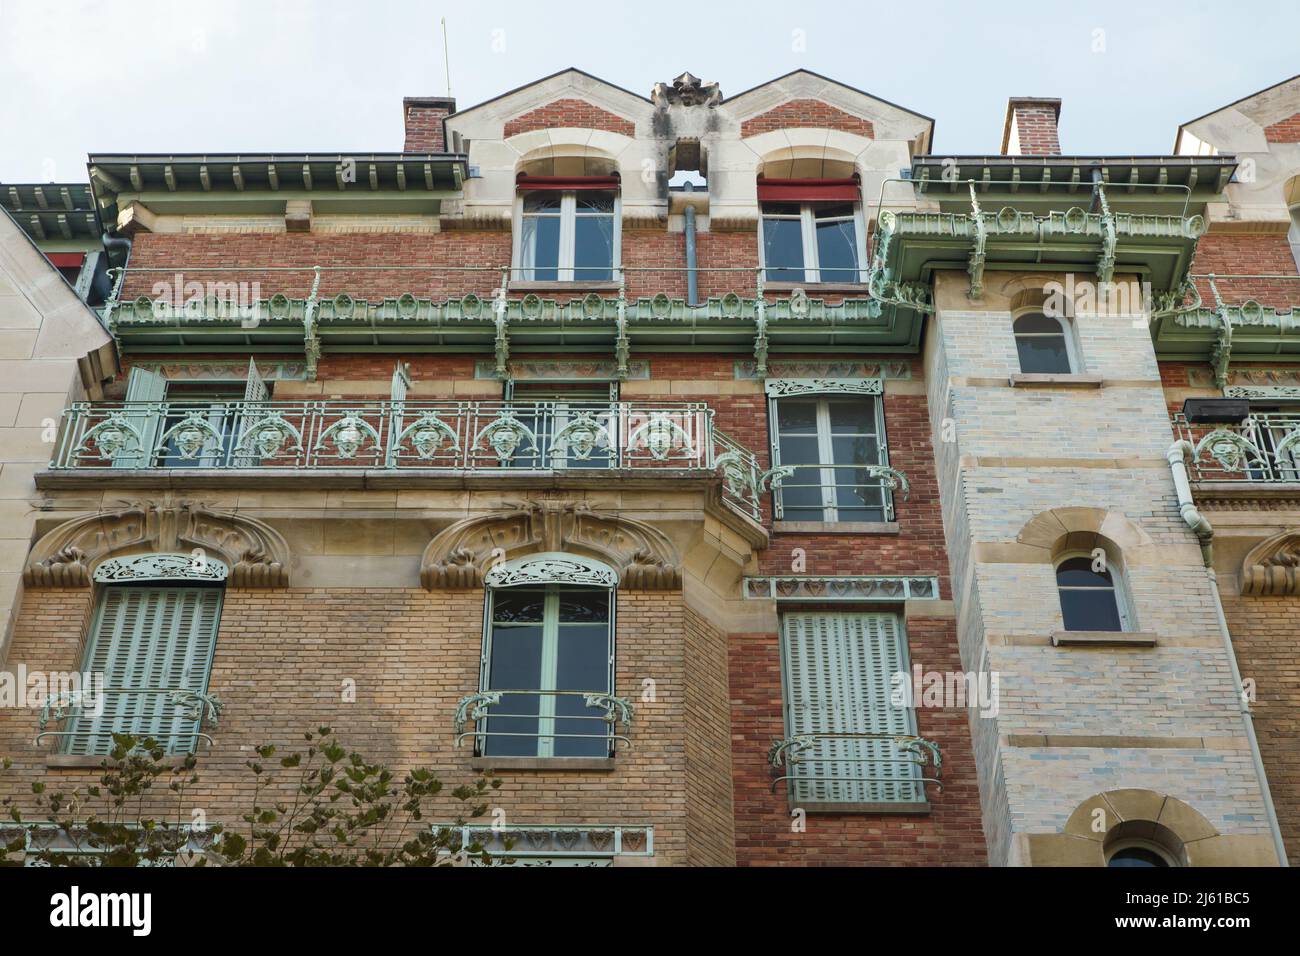 Castel Béranger in Paris, France. The residential building known as the Castel Béranger was designed by French architect Hector Guimard and built between 1895 and 1898 in Rue de la Fontaine. It was the first building in Paris in the style known as Art Nouveau. Stock Photo